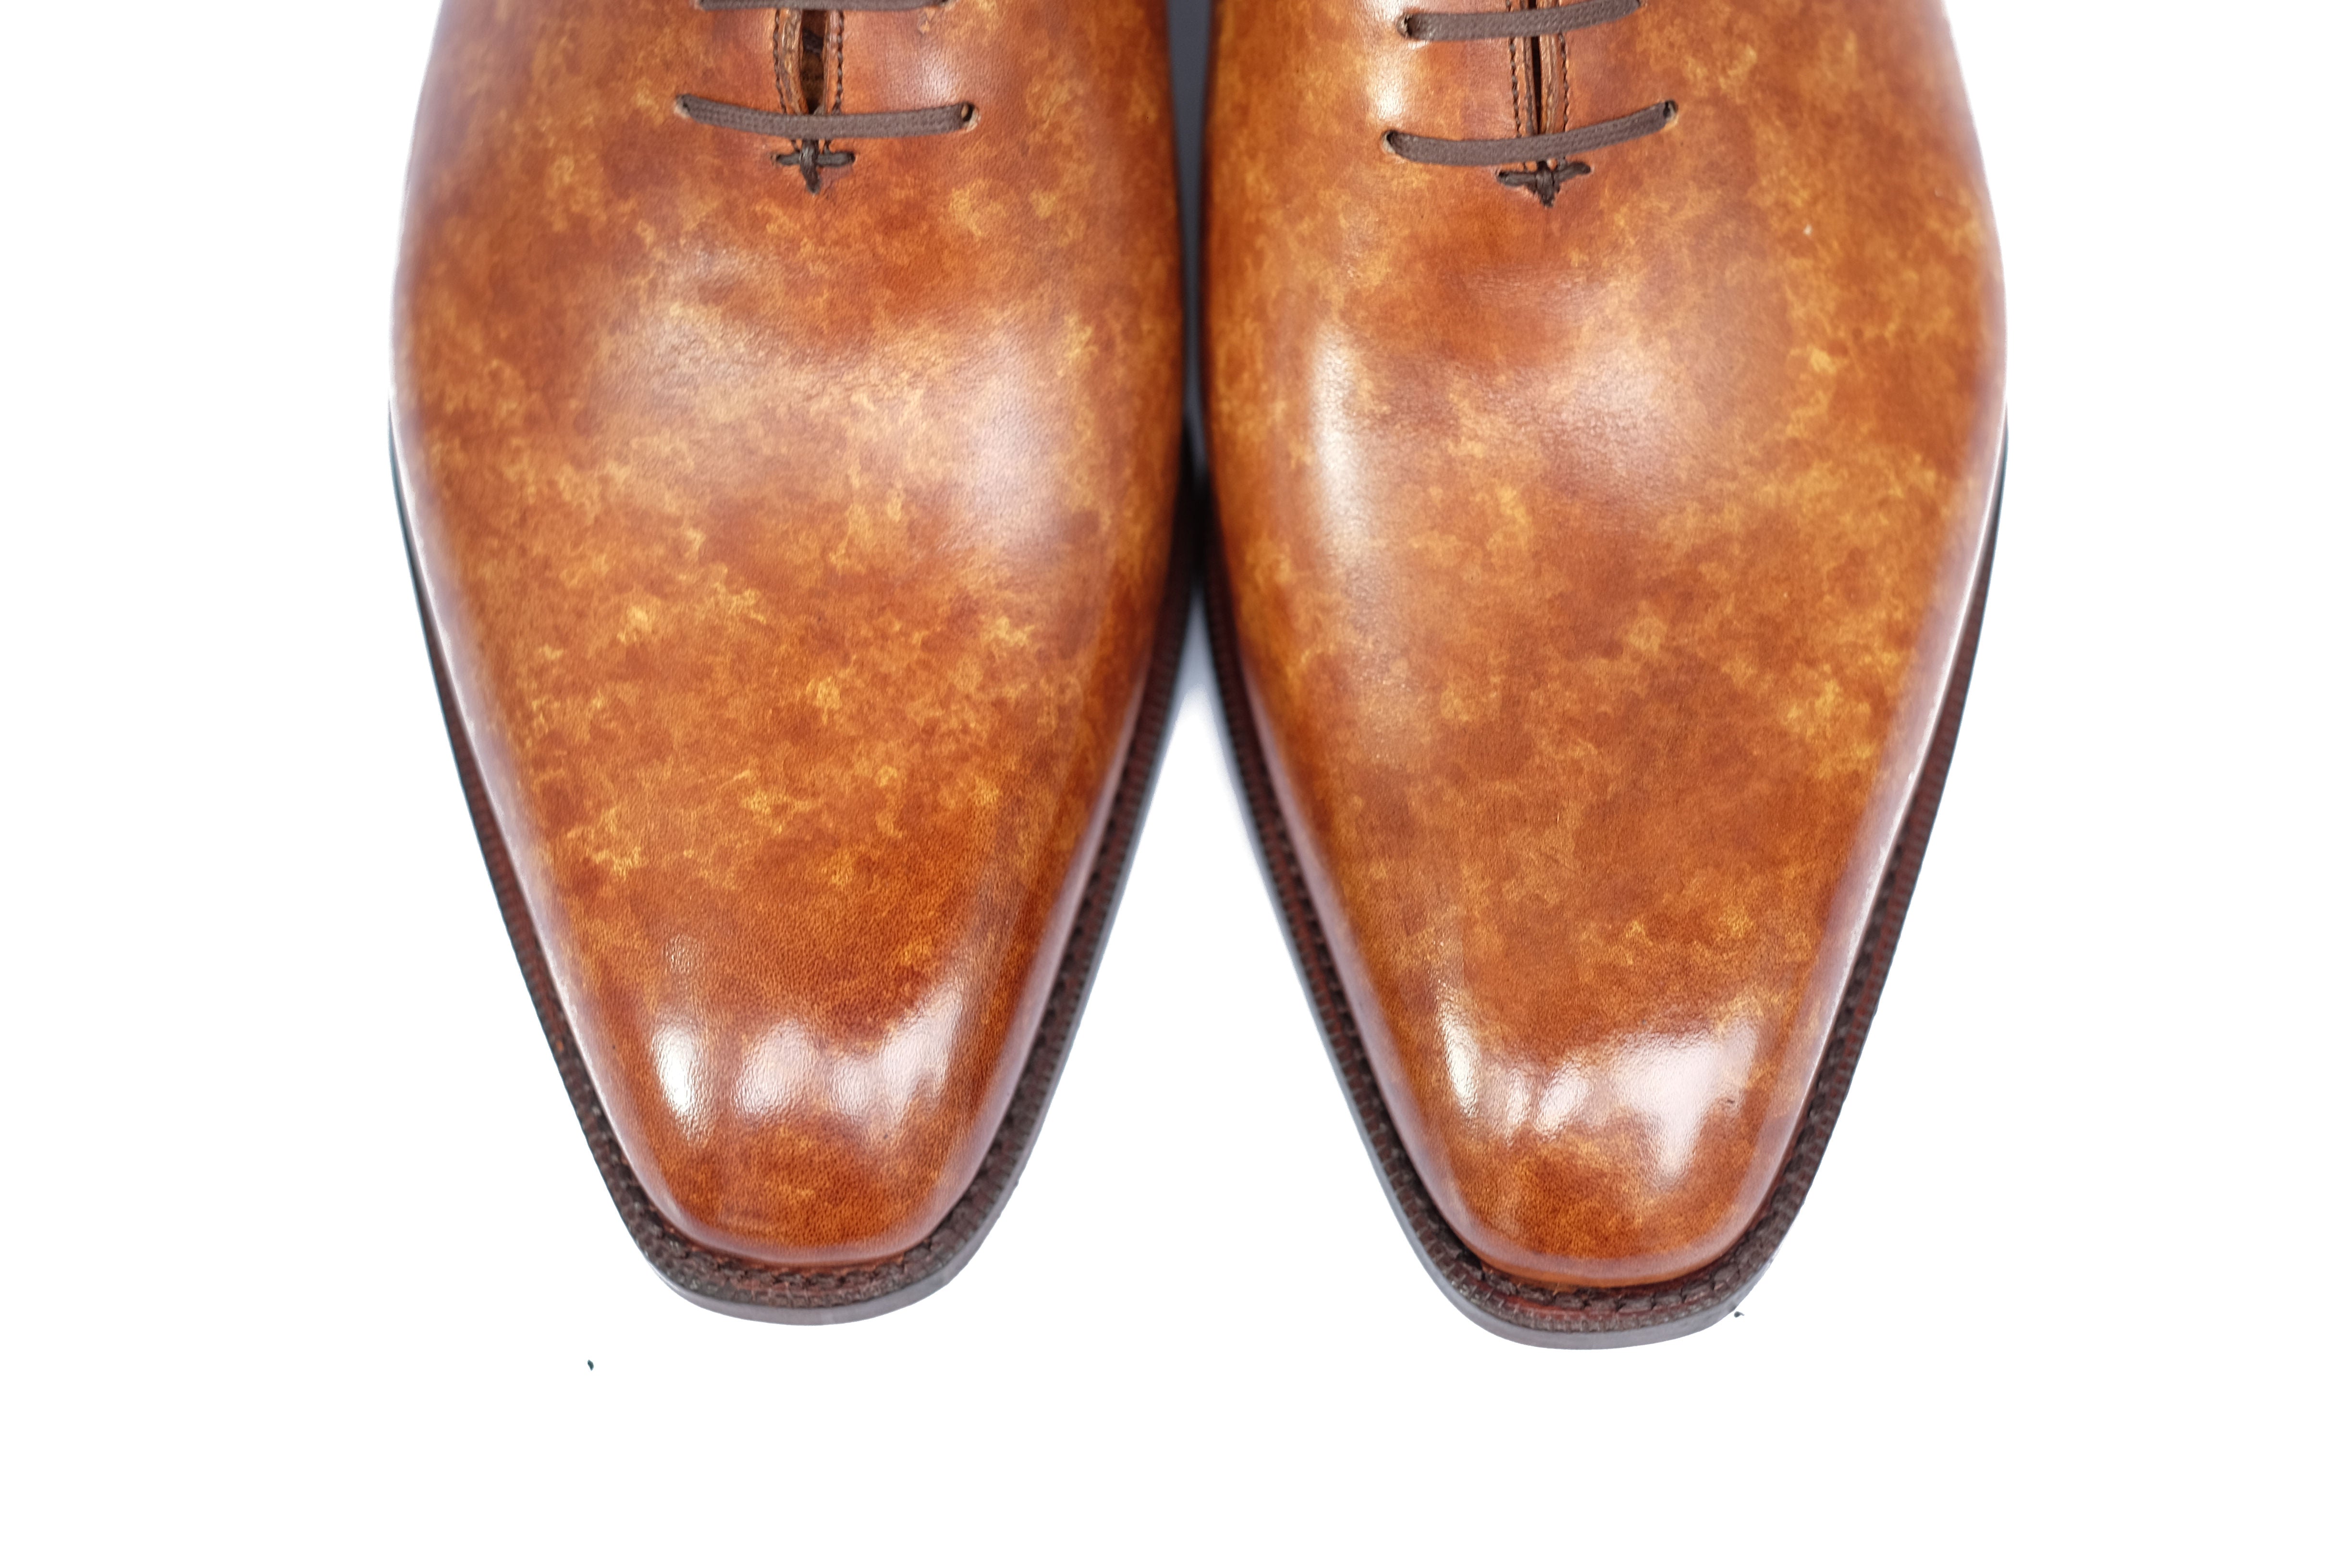 Skyway - MTO - Gold Marble Patina - LPB Last - Single Leather Sole